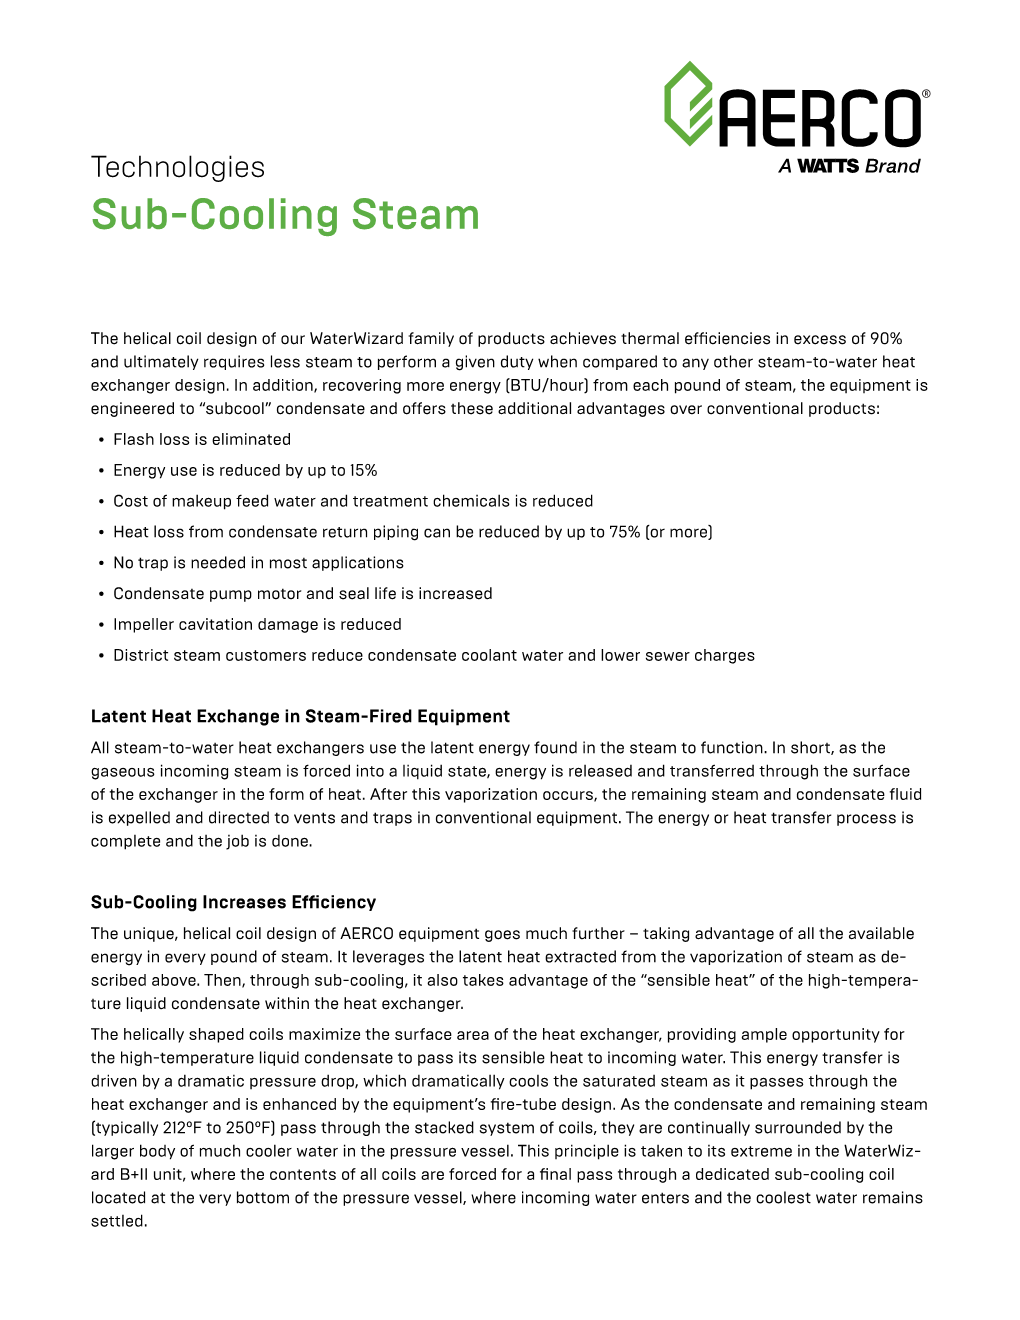 Sub-Cooling Steam